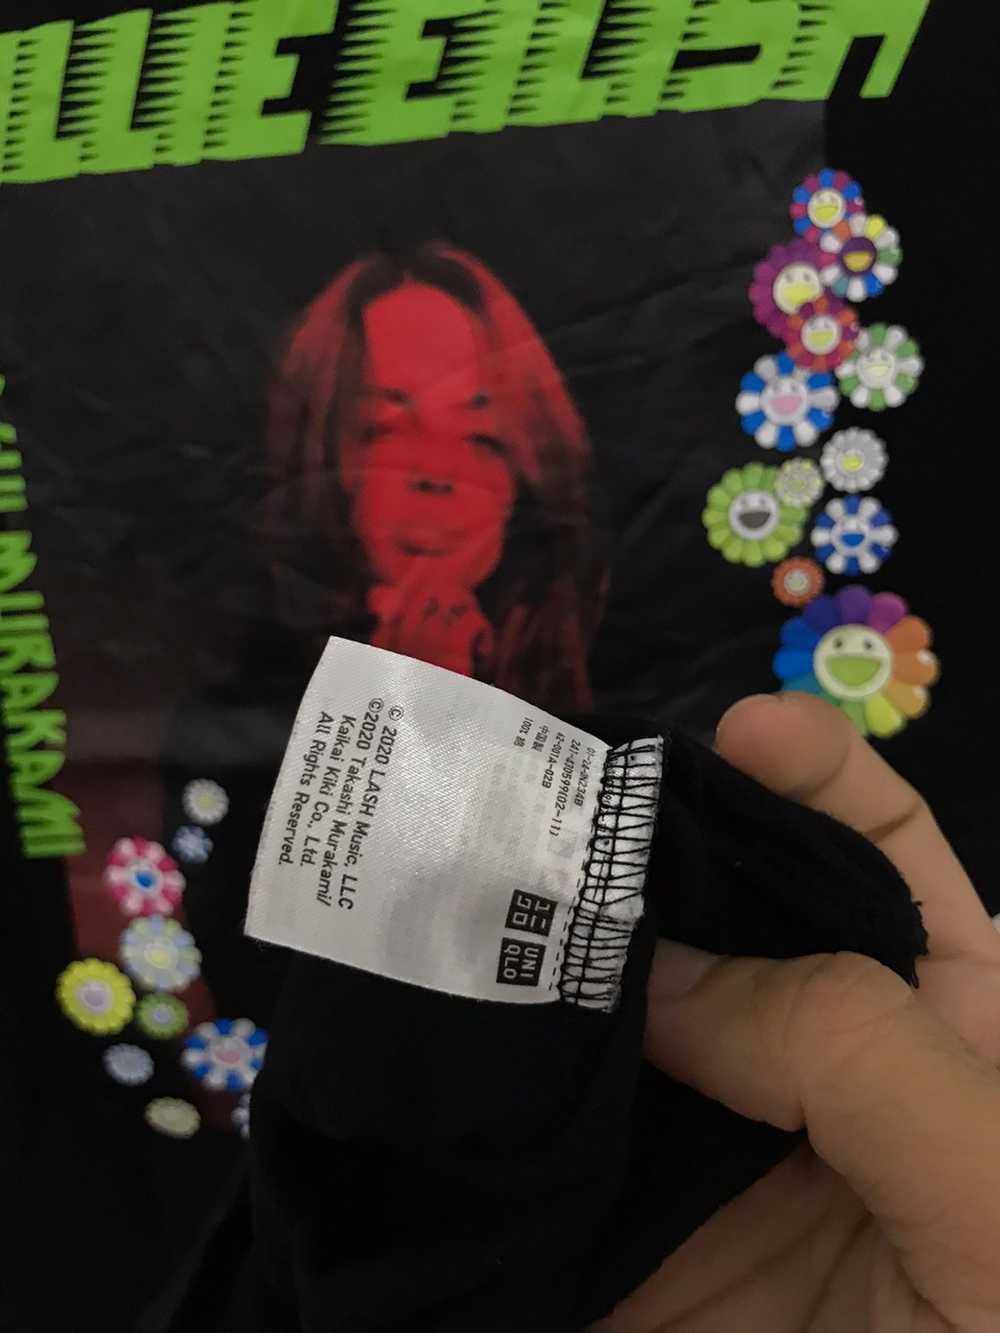 billie eilish on X: BILLIE EILISH x TAKASHI MURAKAMI BY DON C Limited  edition merch collection available now, as seen in the video for “you  should see me in a crown”, only